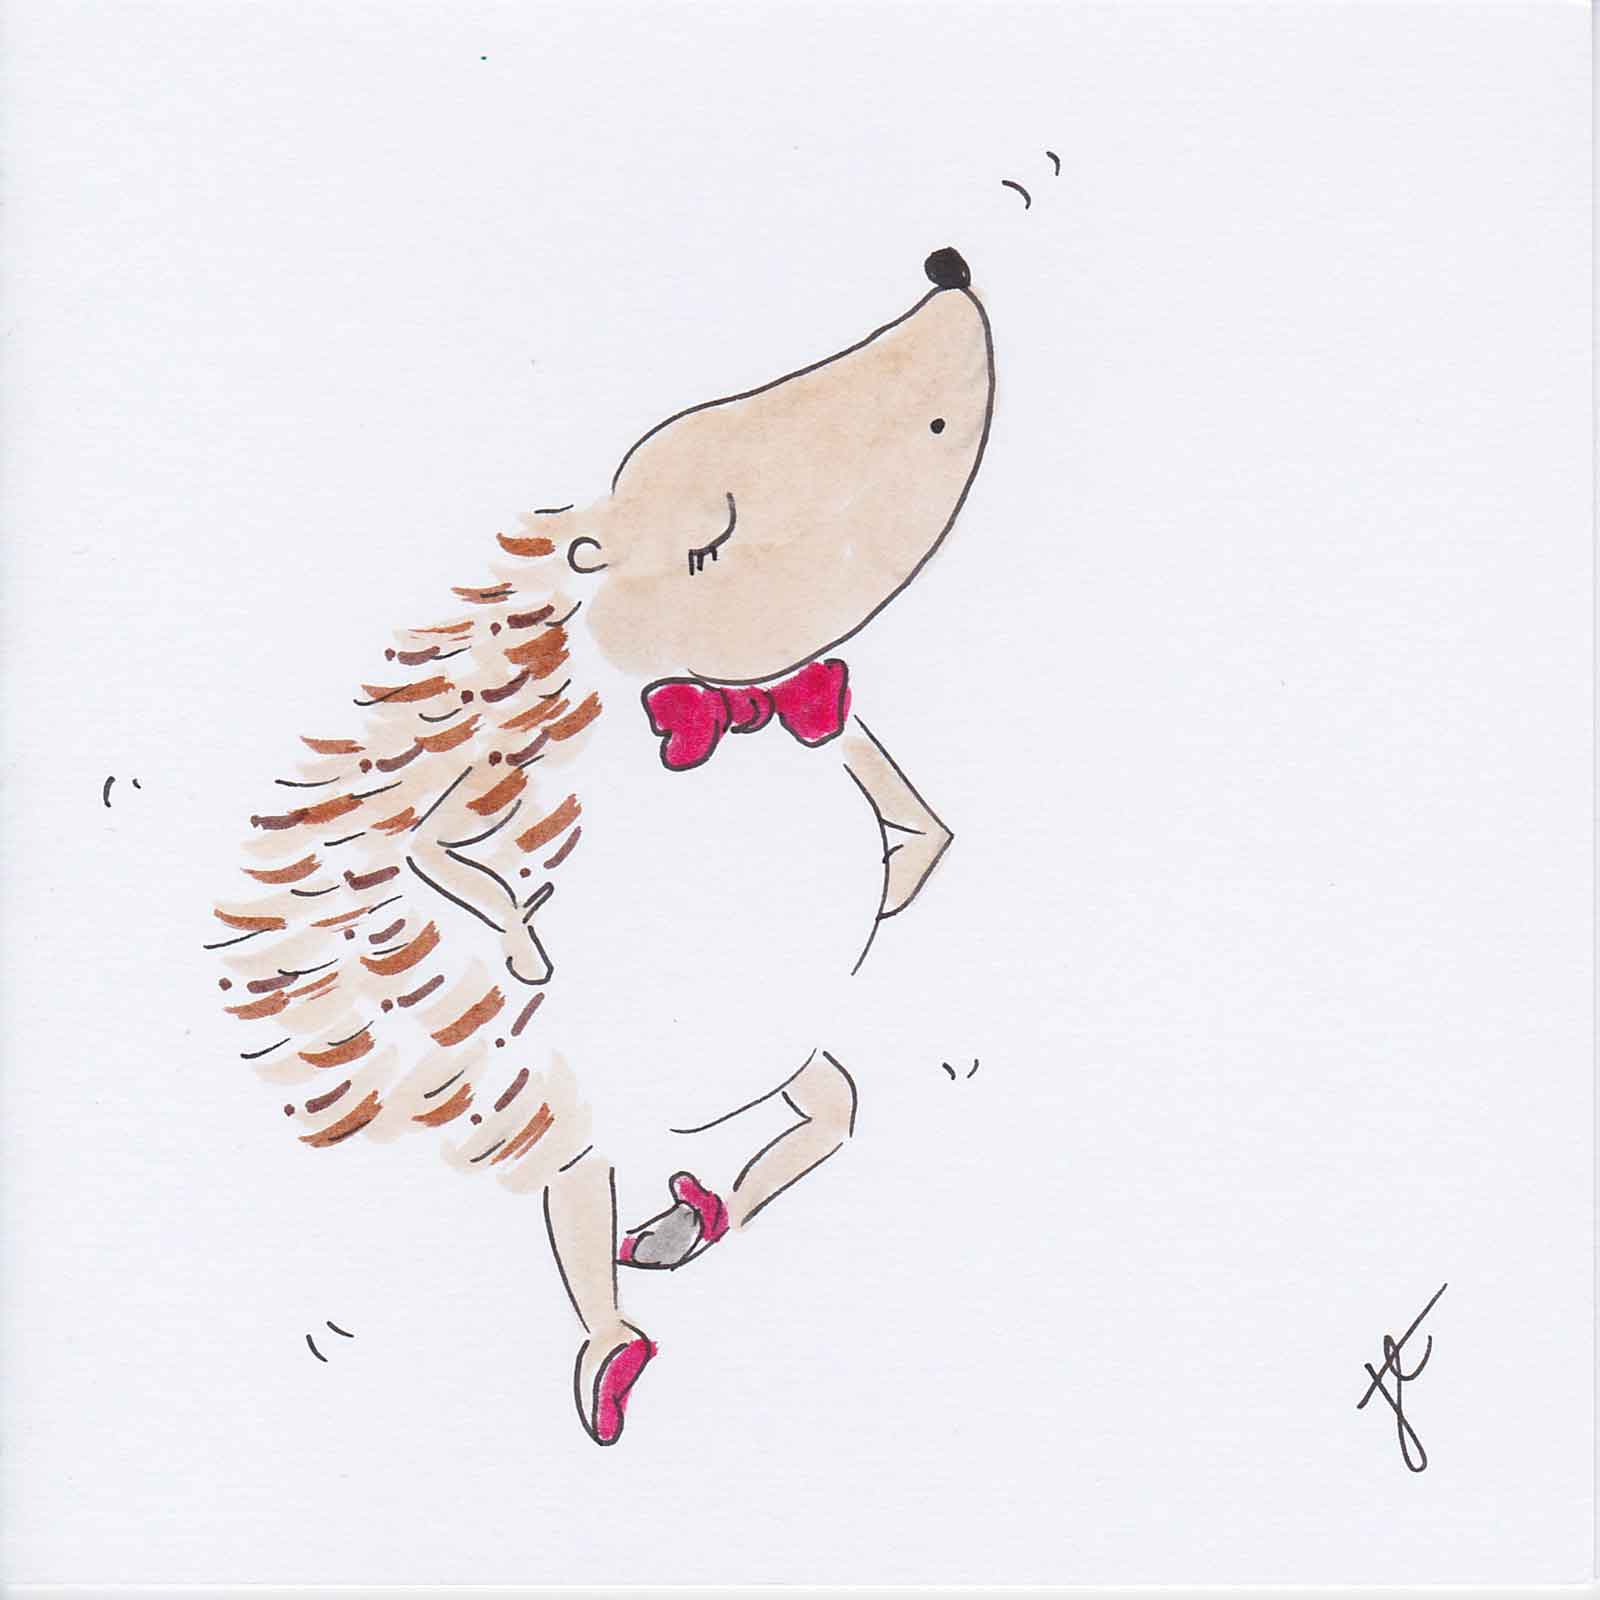 Hedgio Ballettoons illustrated card: pirouette pose and red bow tie and shoes